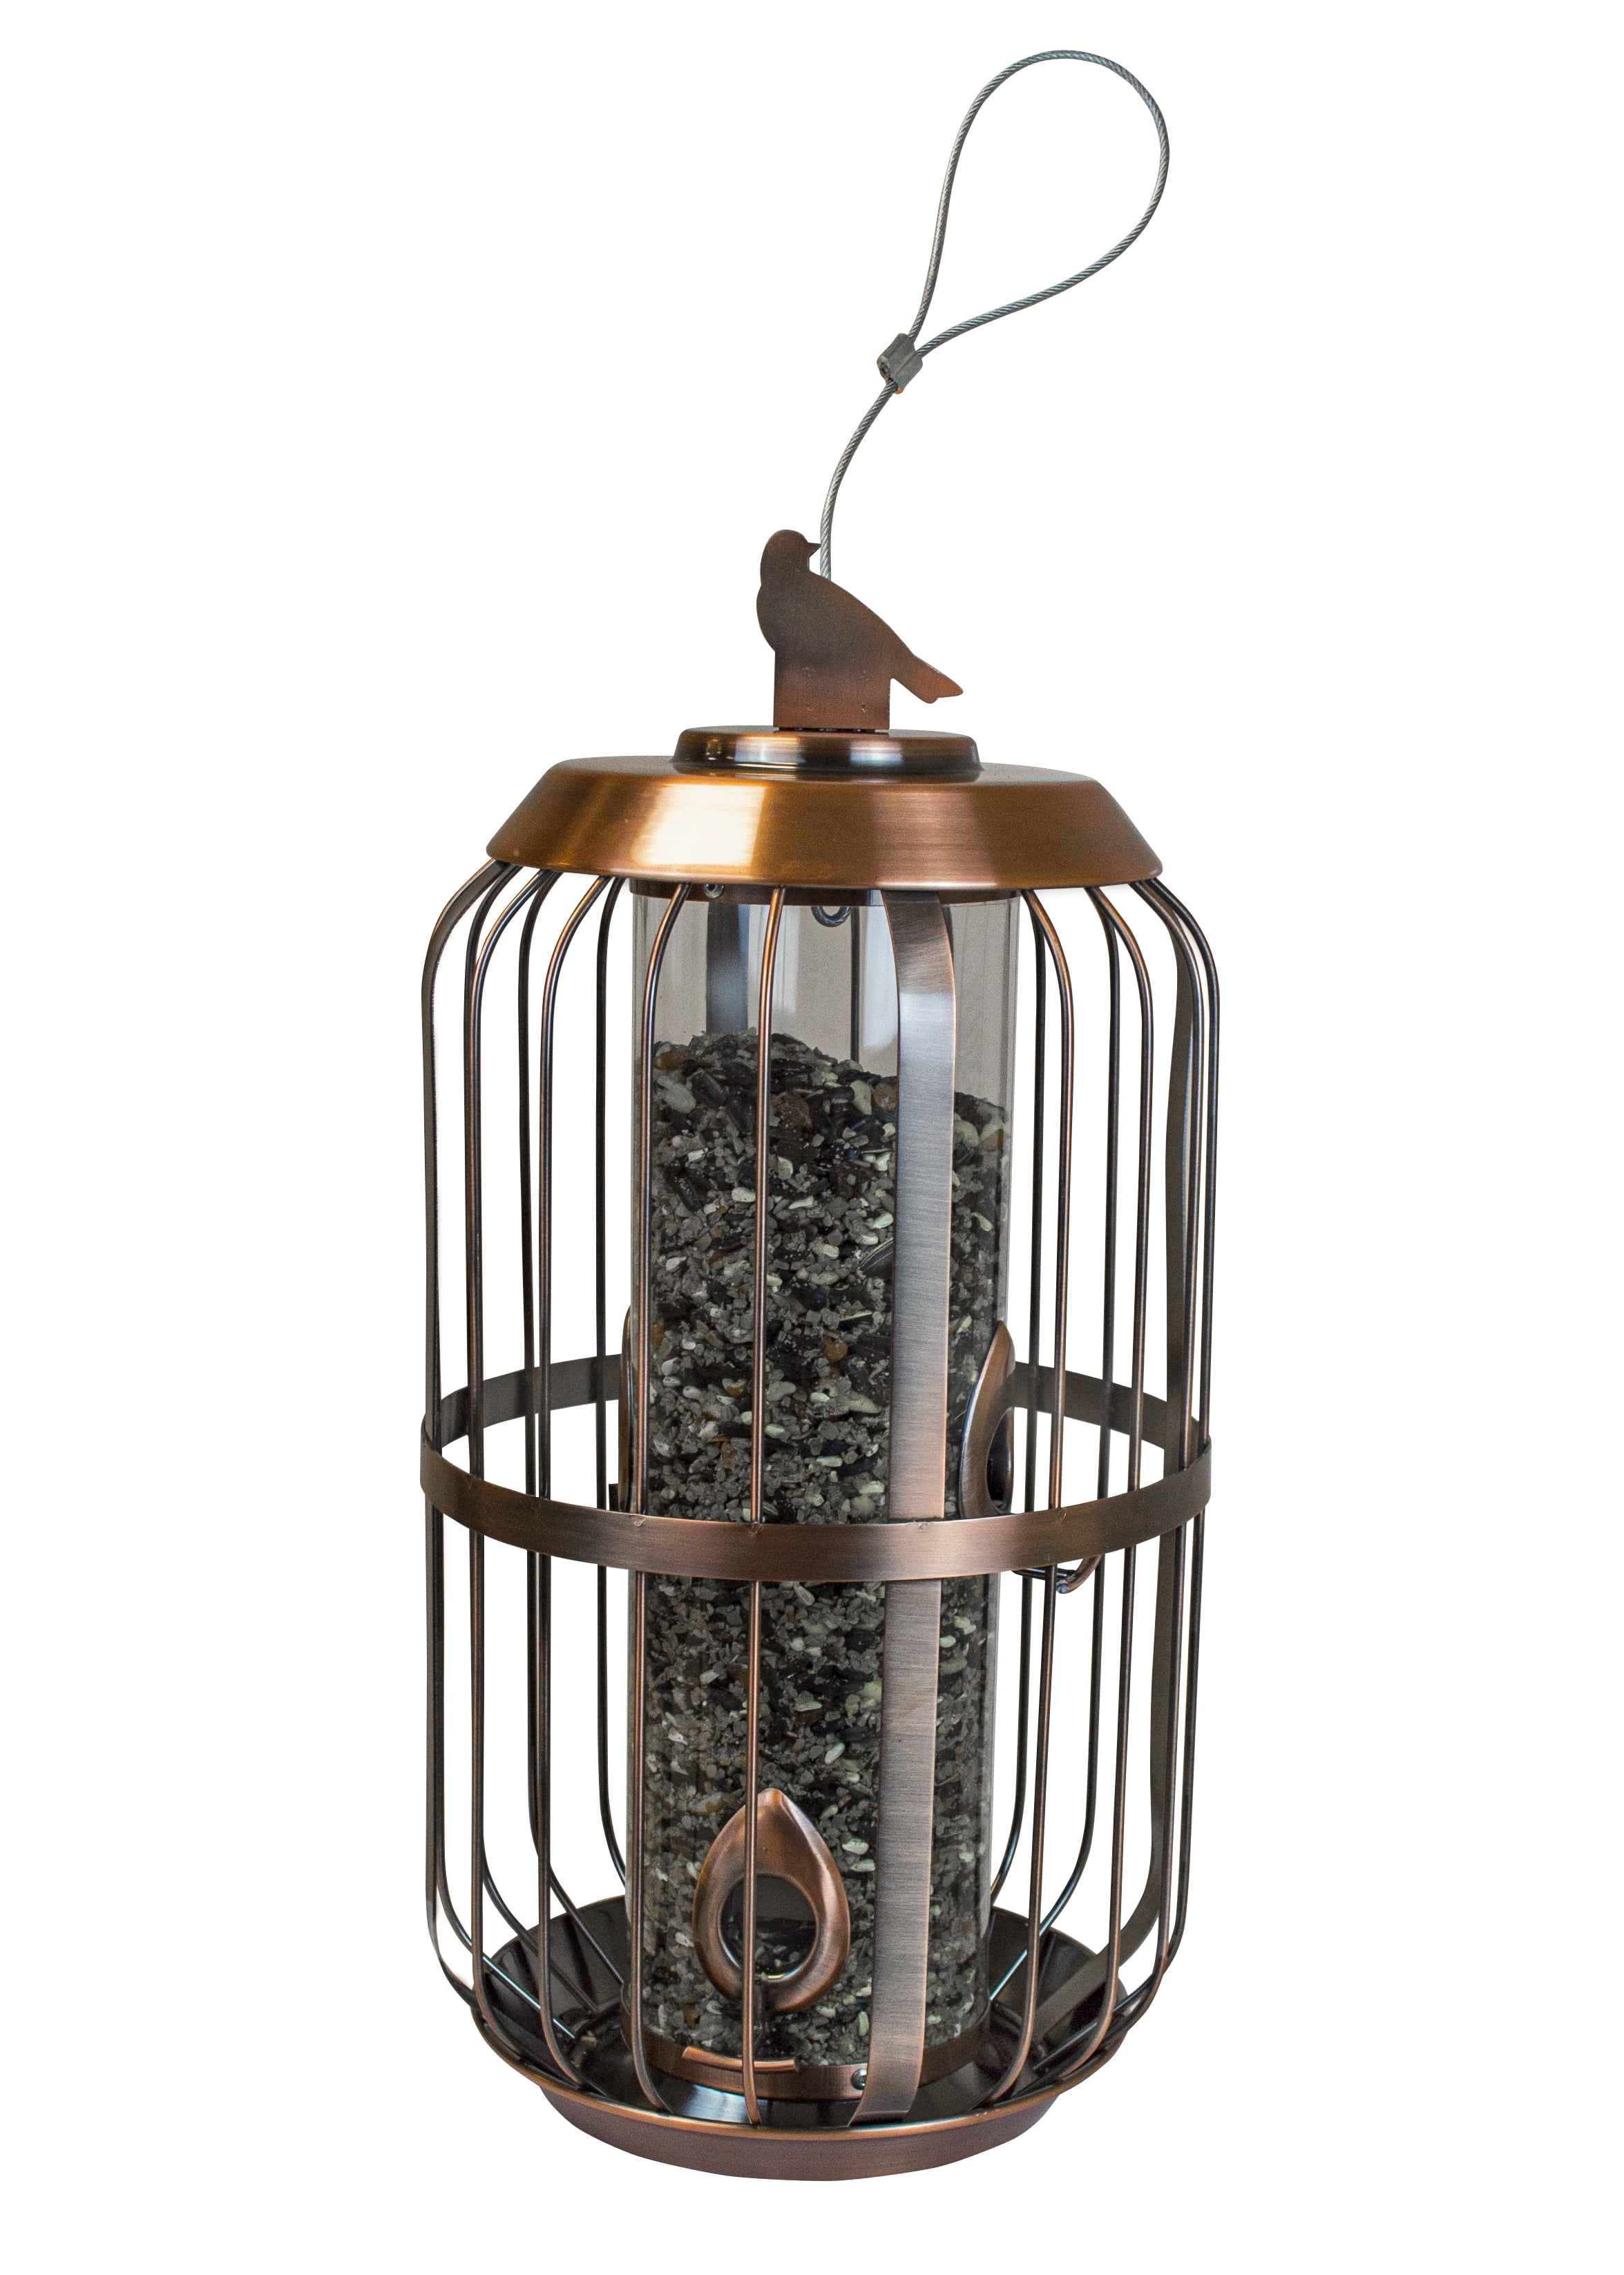 Picture of Outdoor Leisure Products BF1001 Deluxe Bird Feeder, Copper